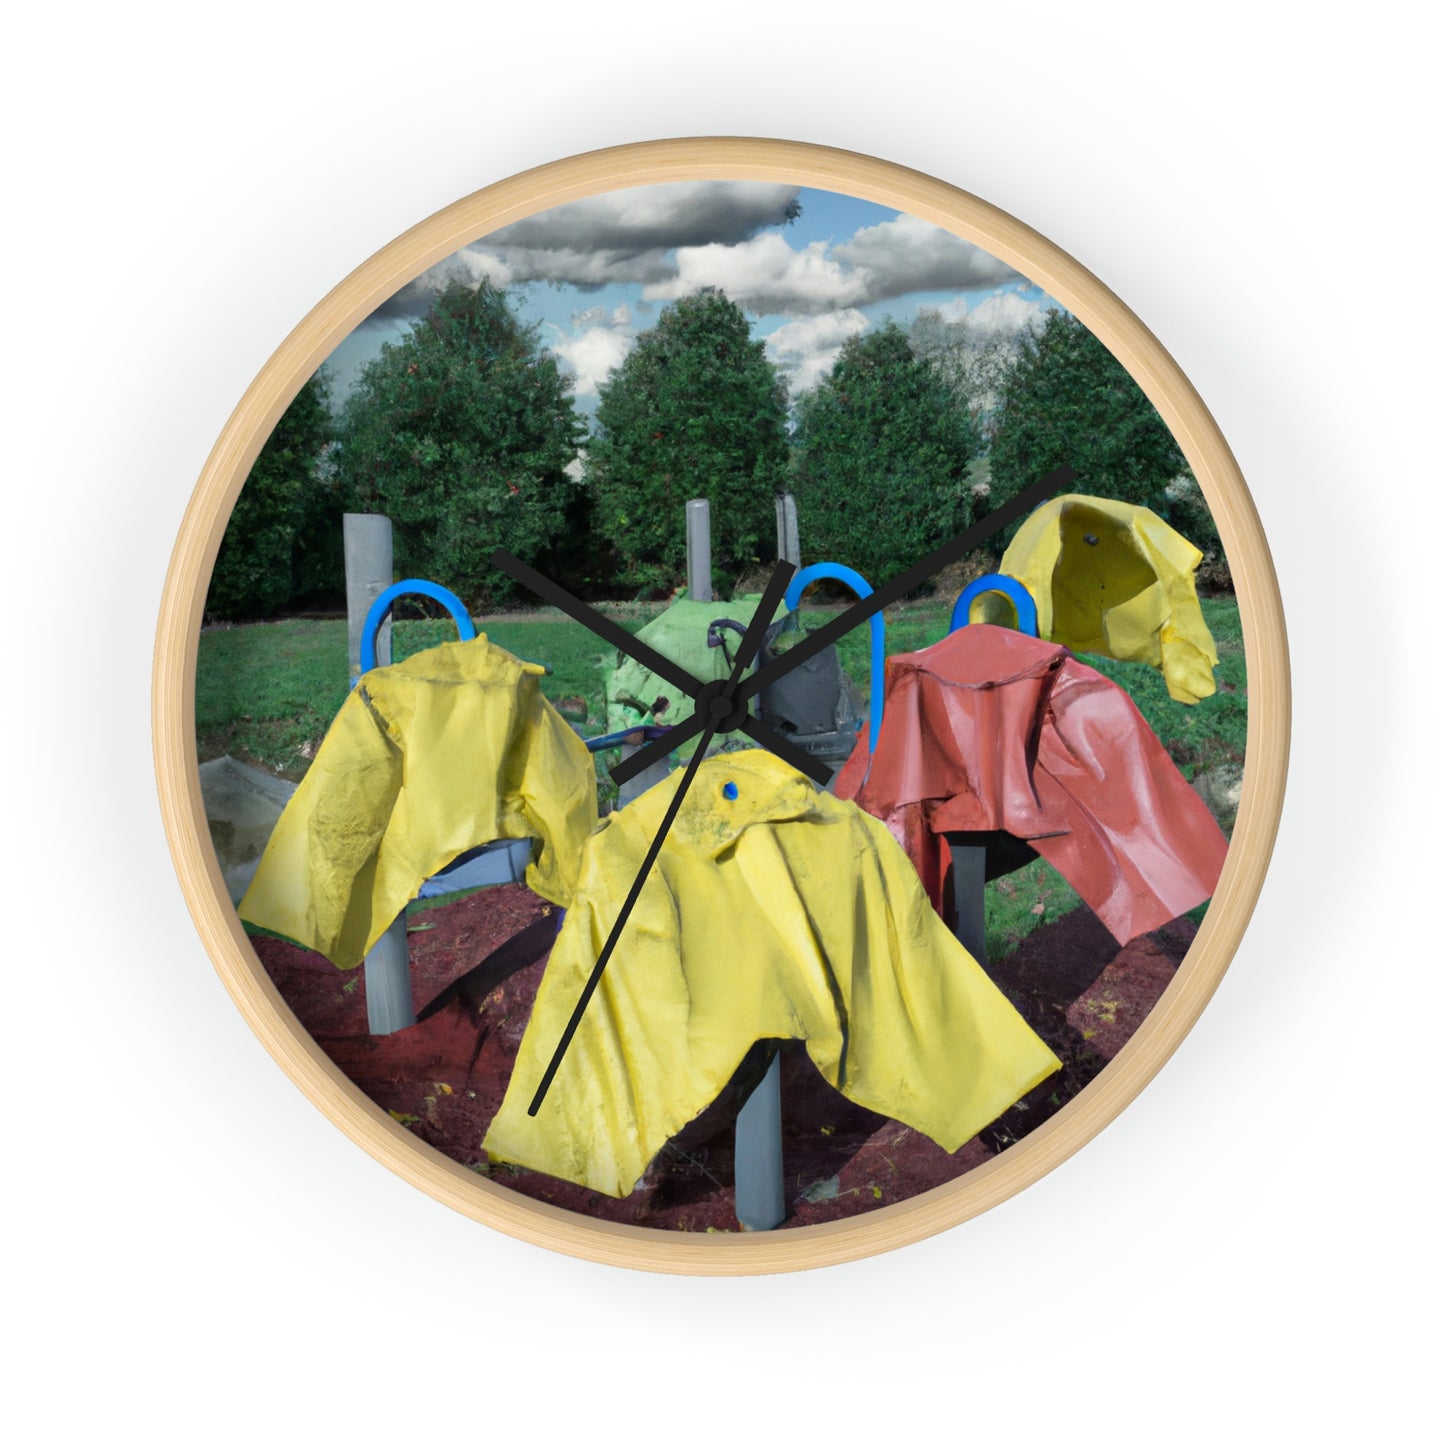 Empty Playground Blues: The Tale Of The Lost Rain Coats - The Alien Wall Clock